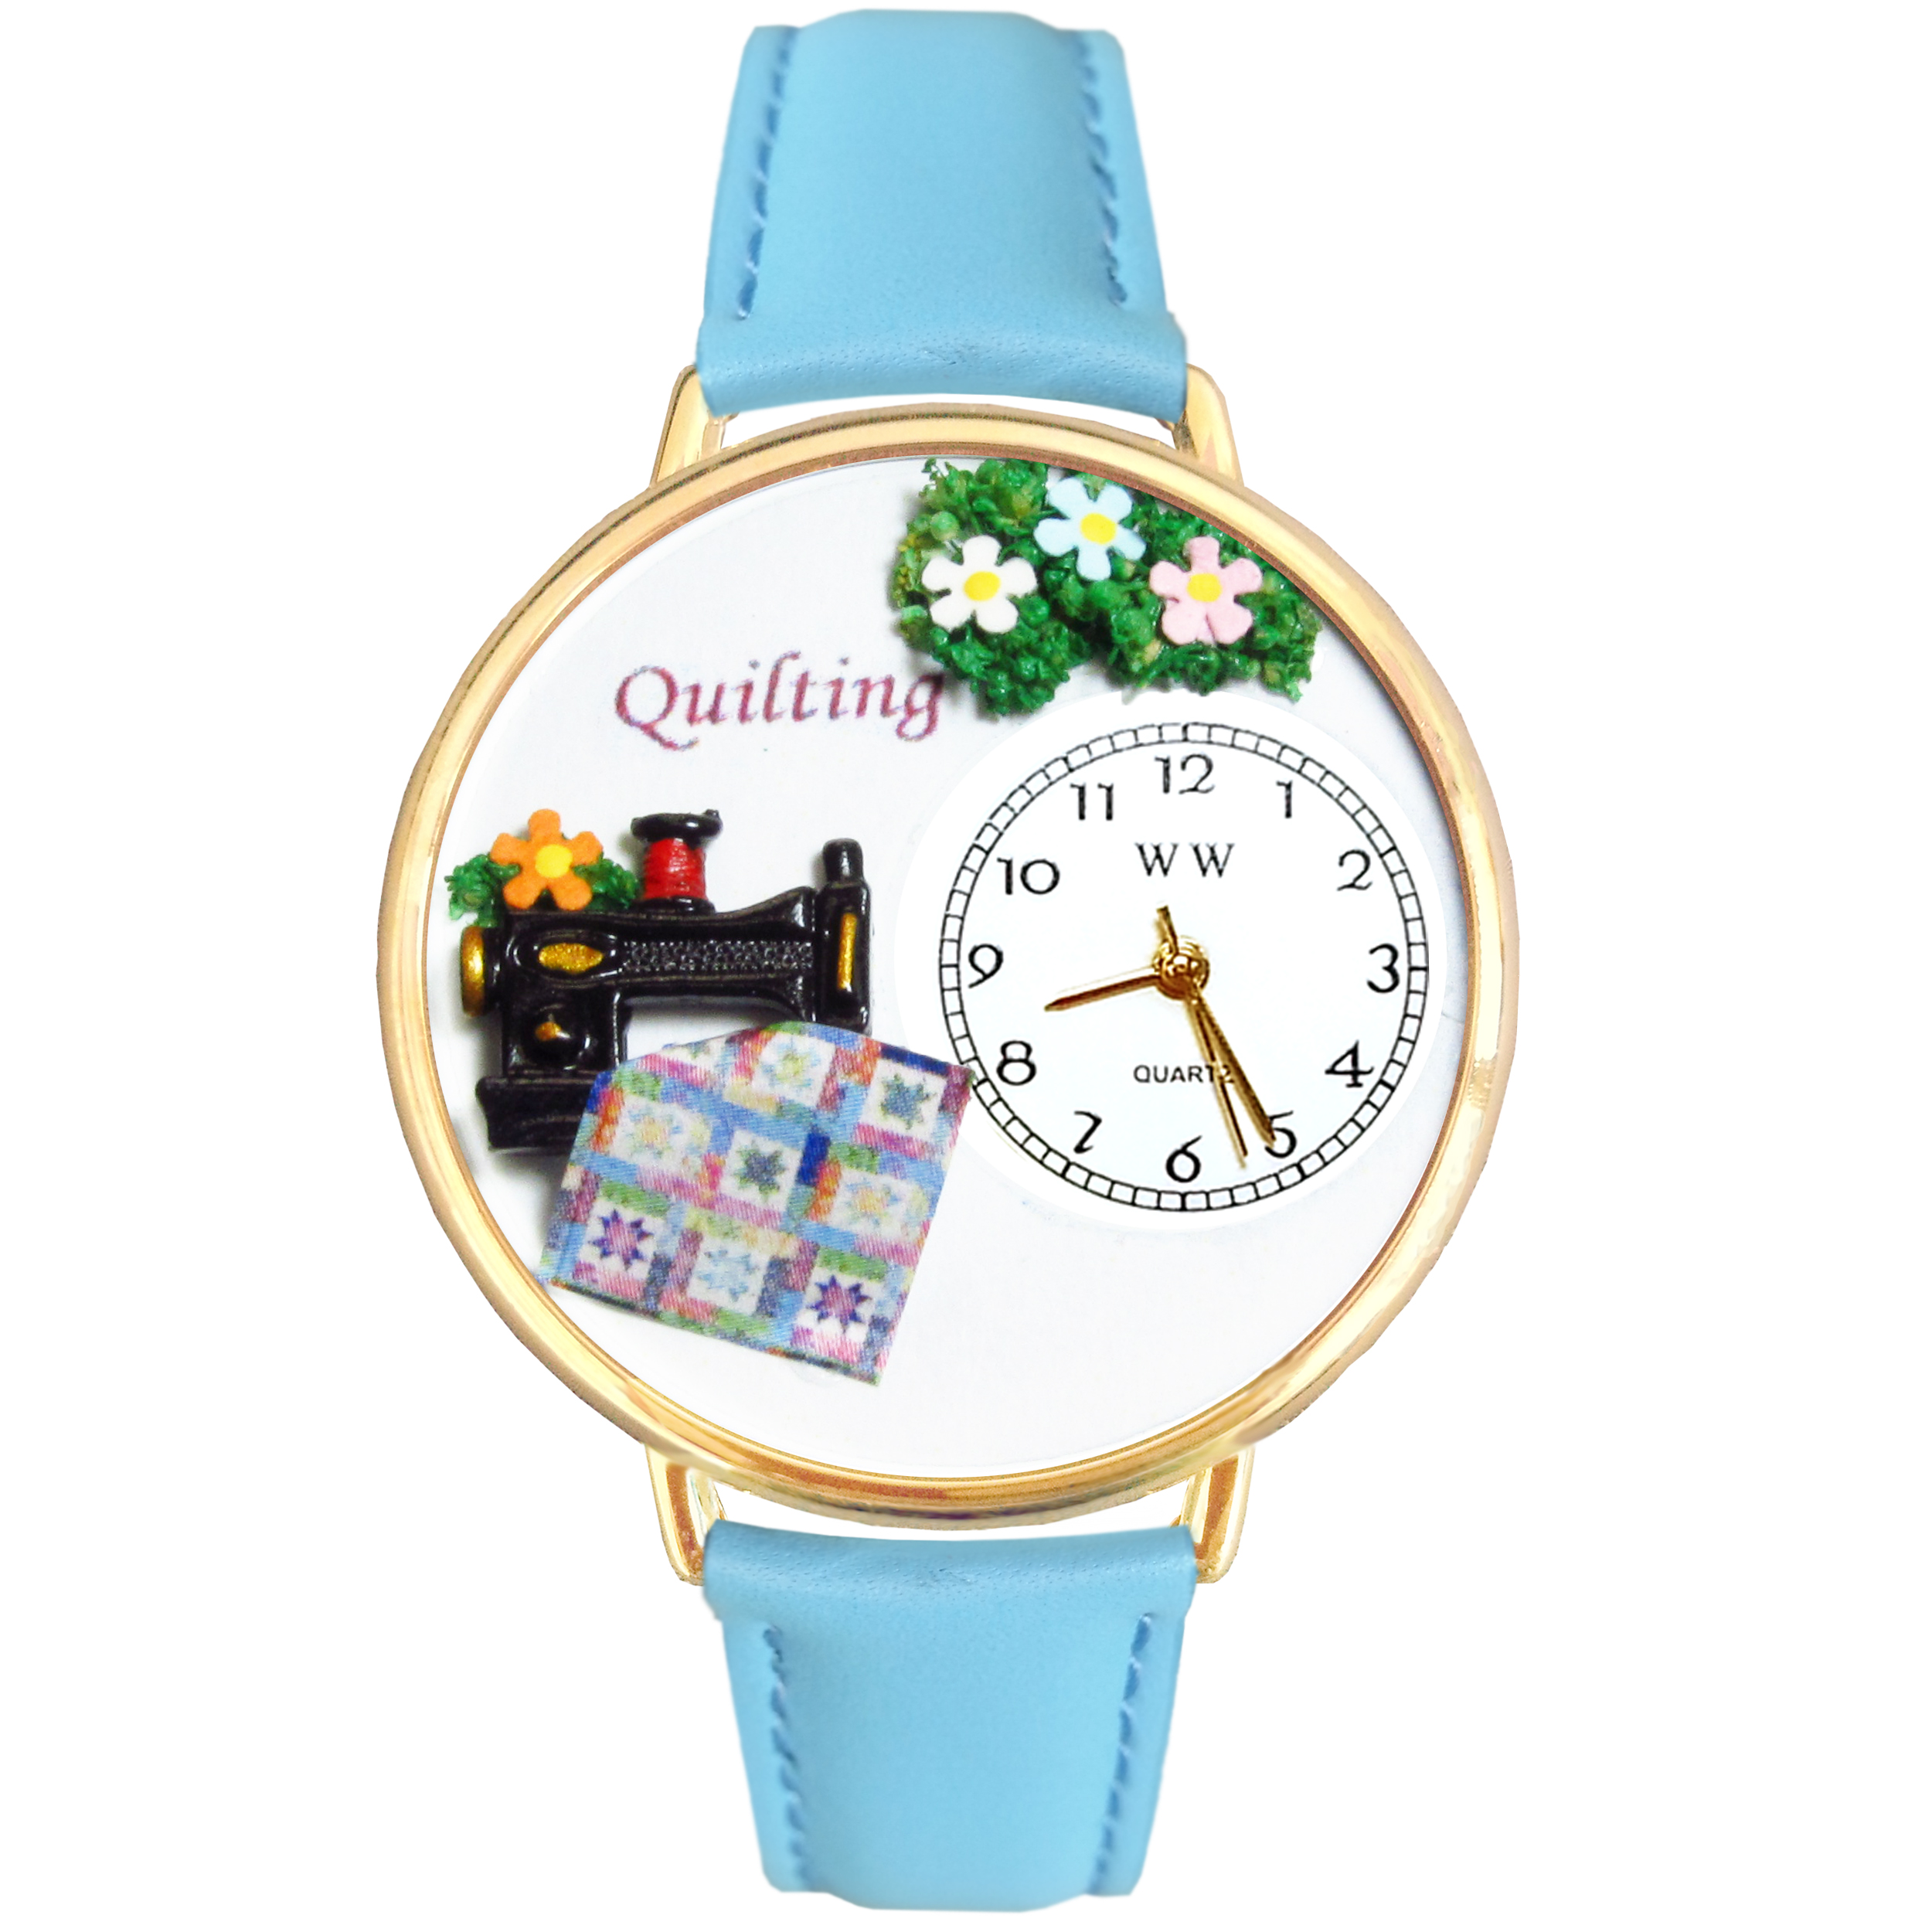 Quilting Watch in Gold (Large)